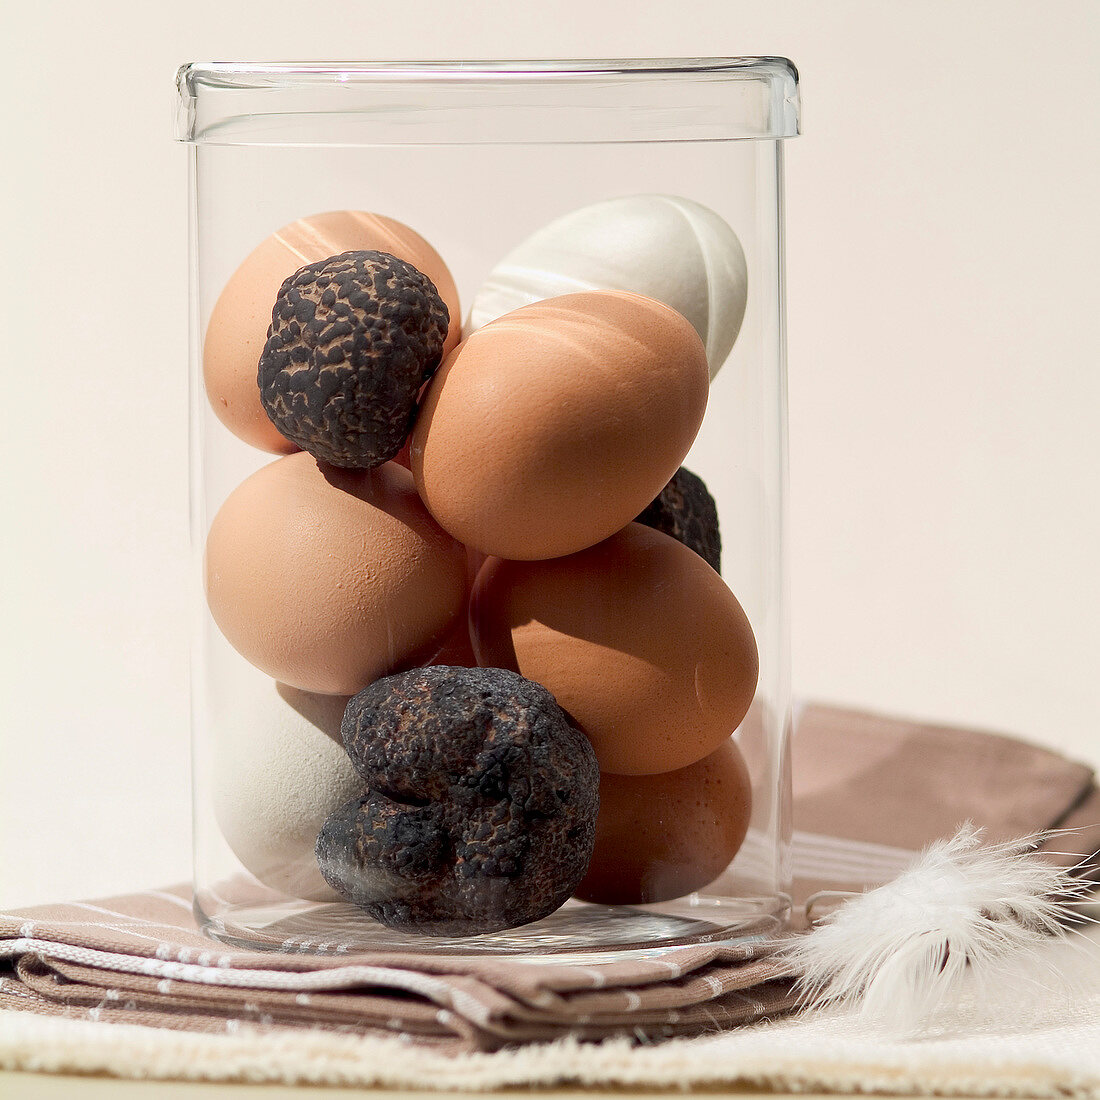 White and brown eggs with black truffles in jar